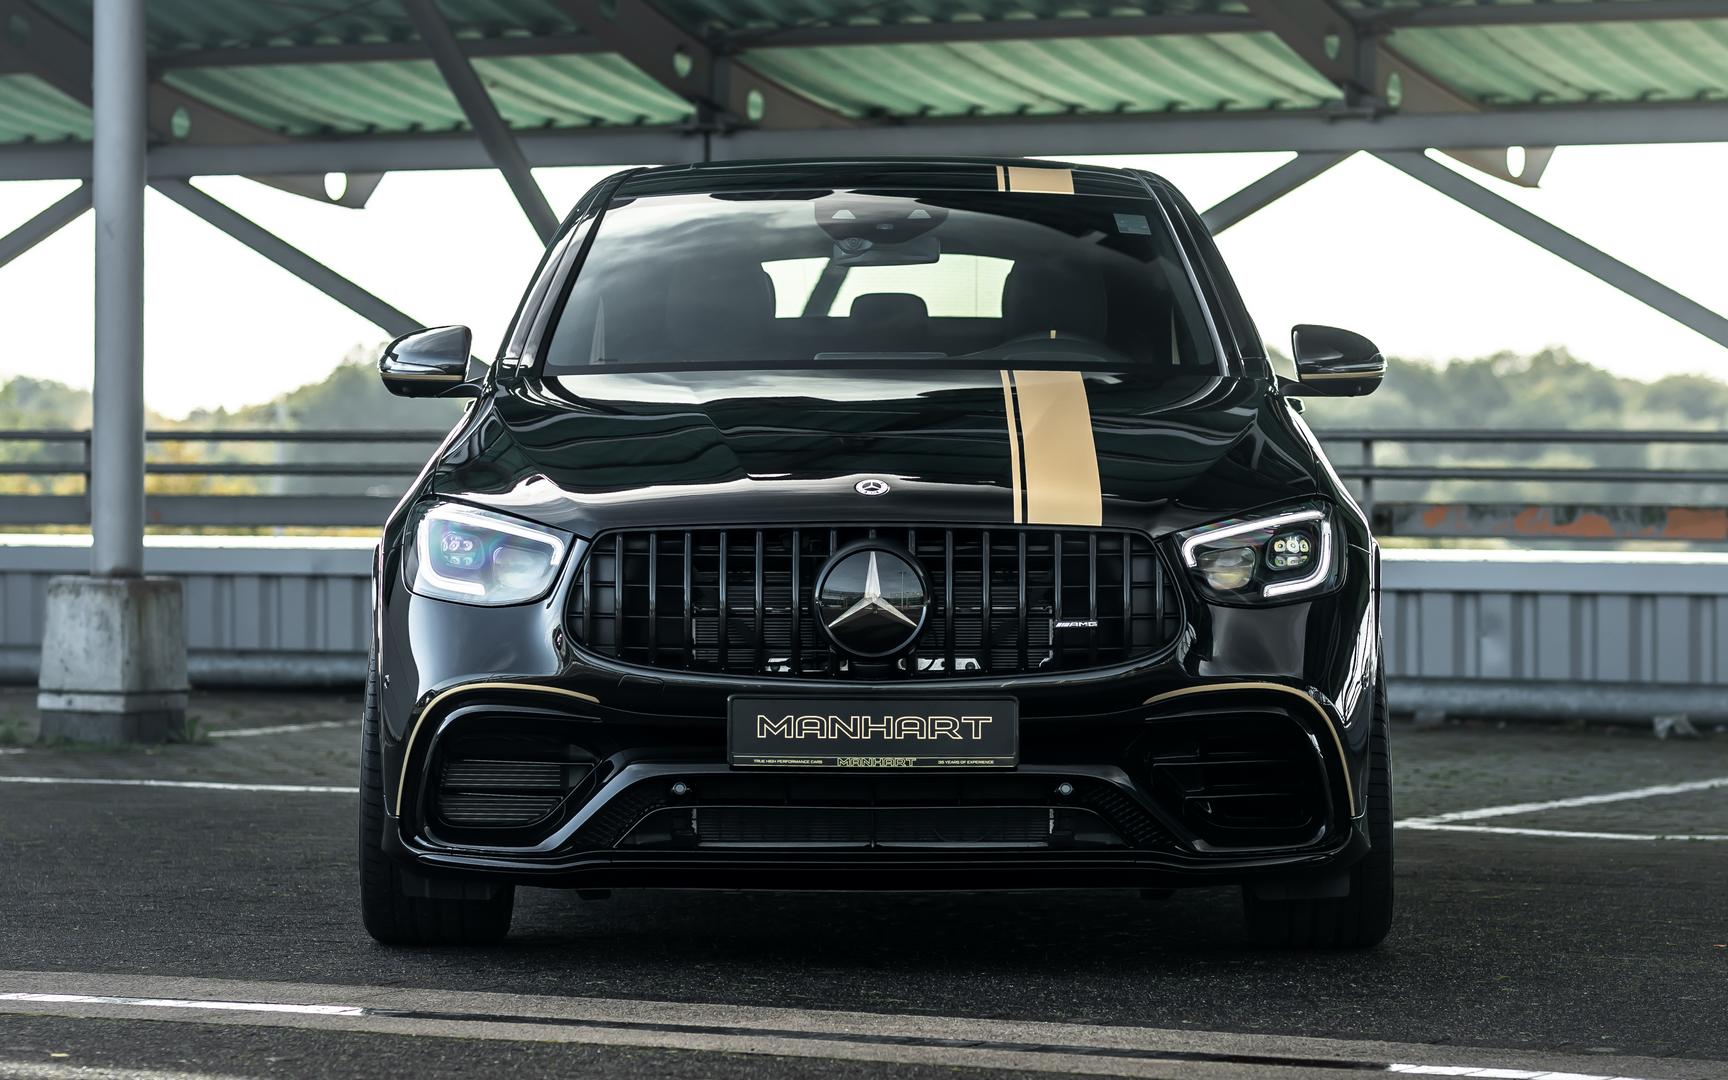 Manhart GLC 63 S Coupe front